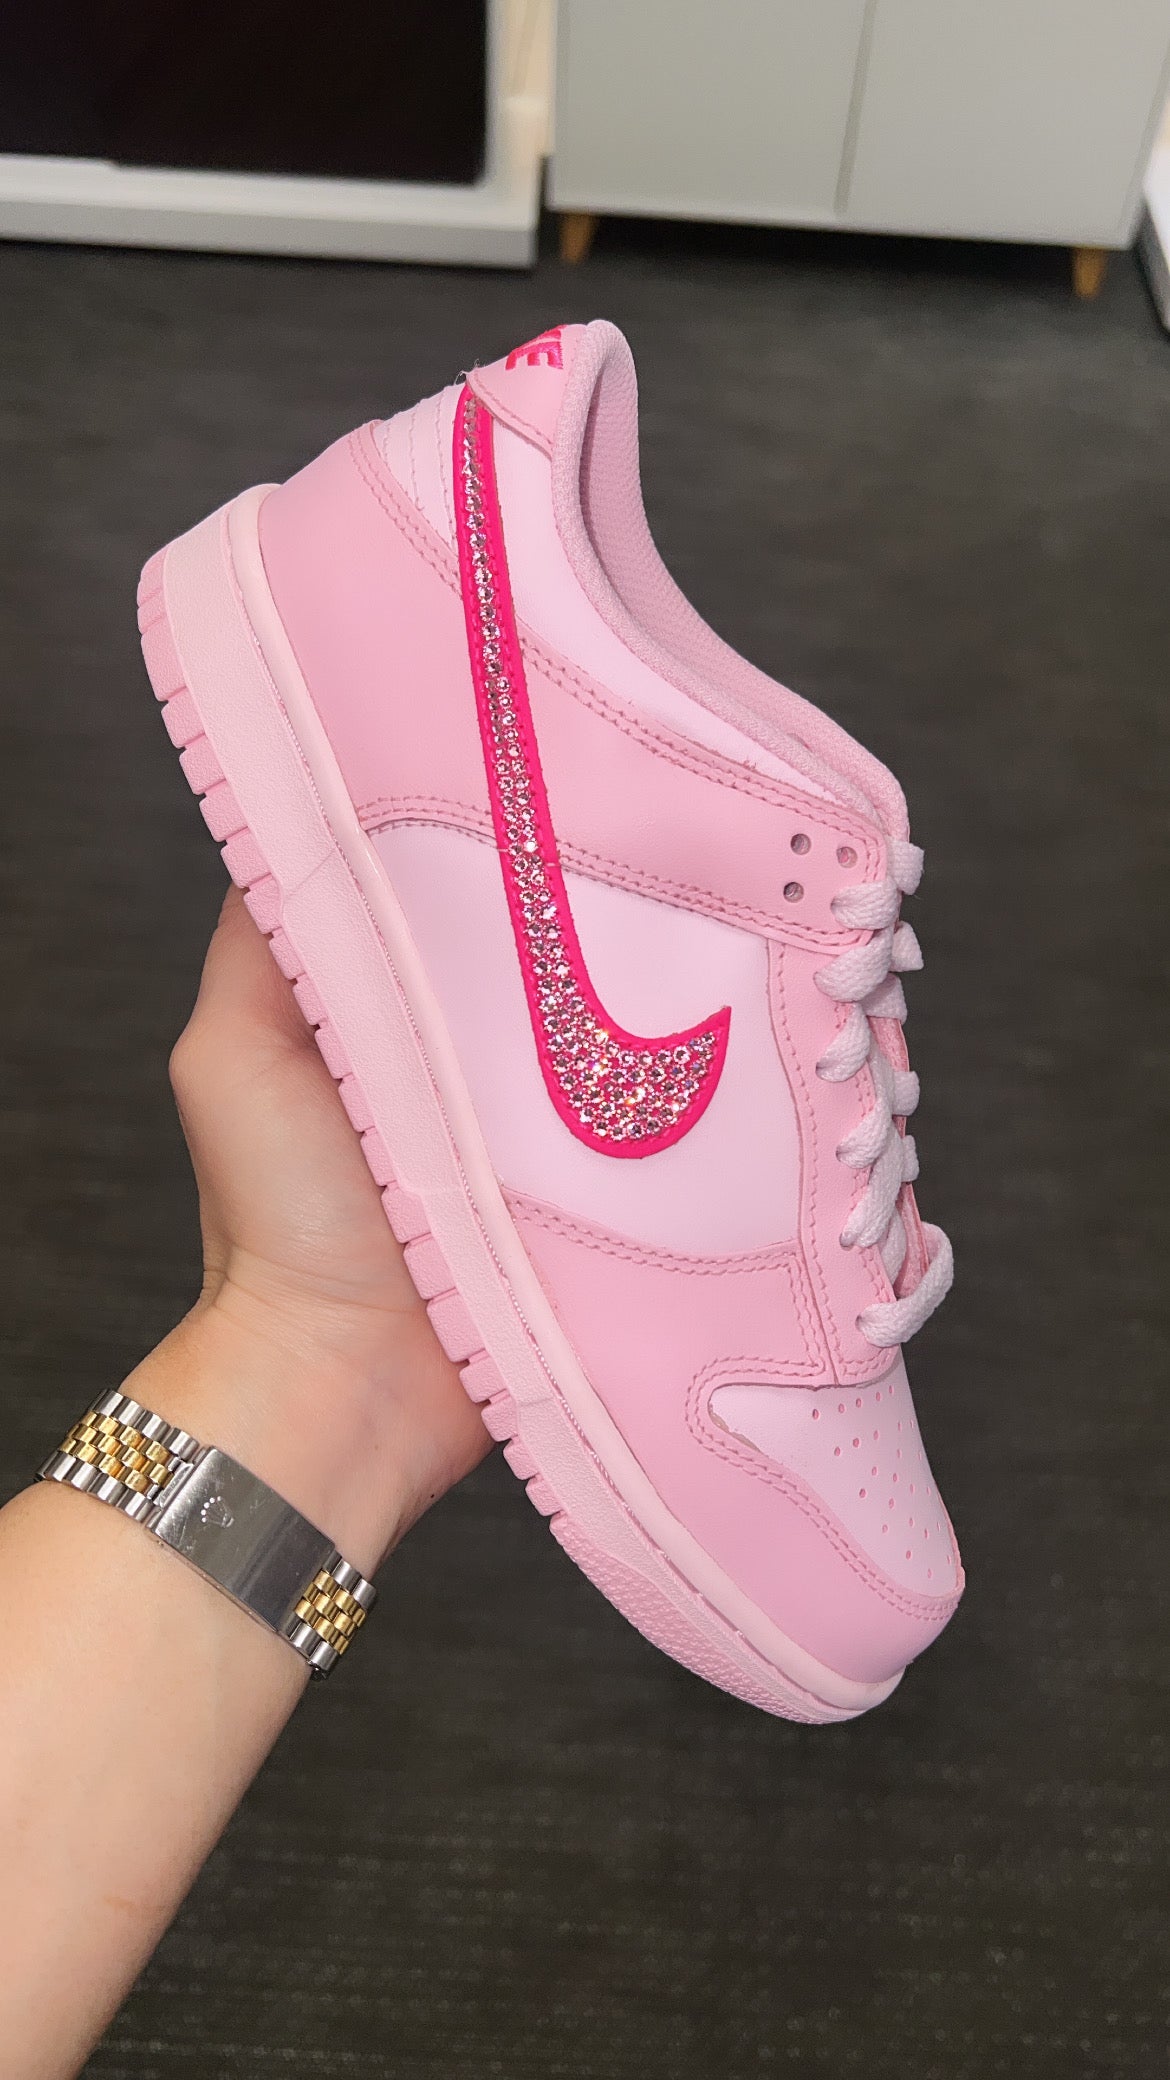 Custom Painted Nike Air force 1 Triple Pink (Start To Finish) 